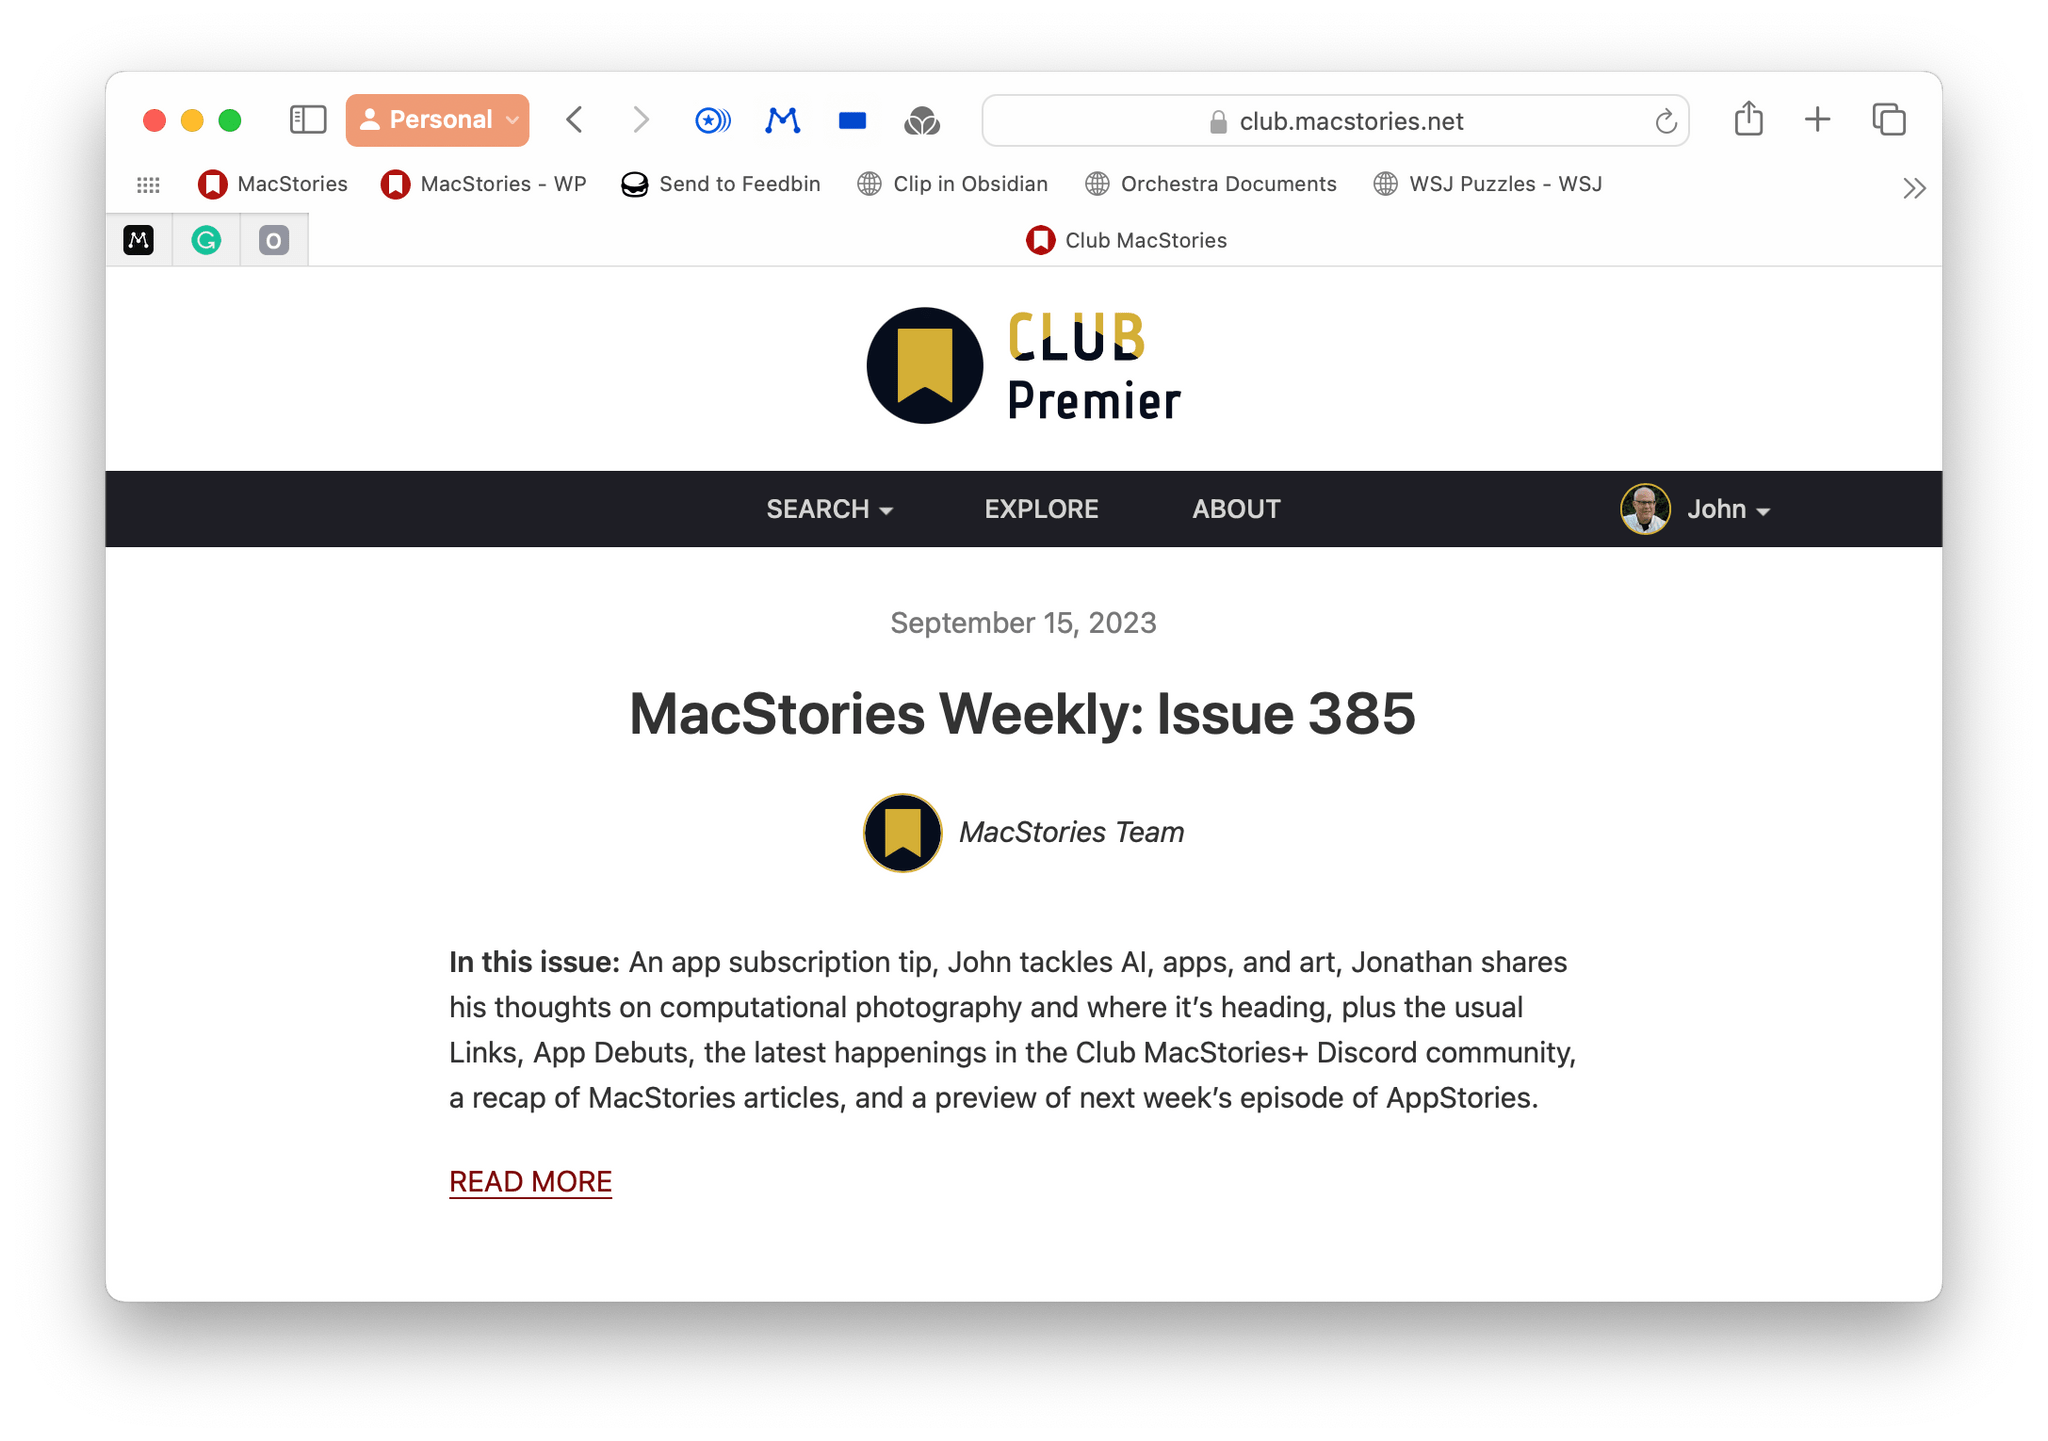 Unreal Development Kit For iOS Coming This Week - MacStories